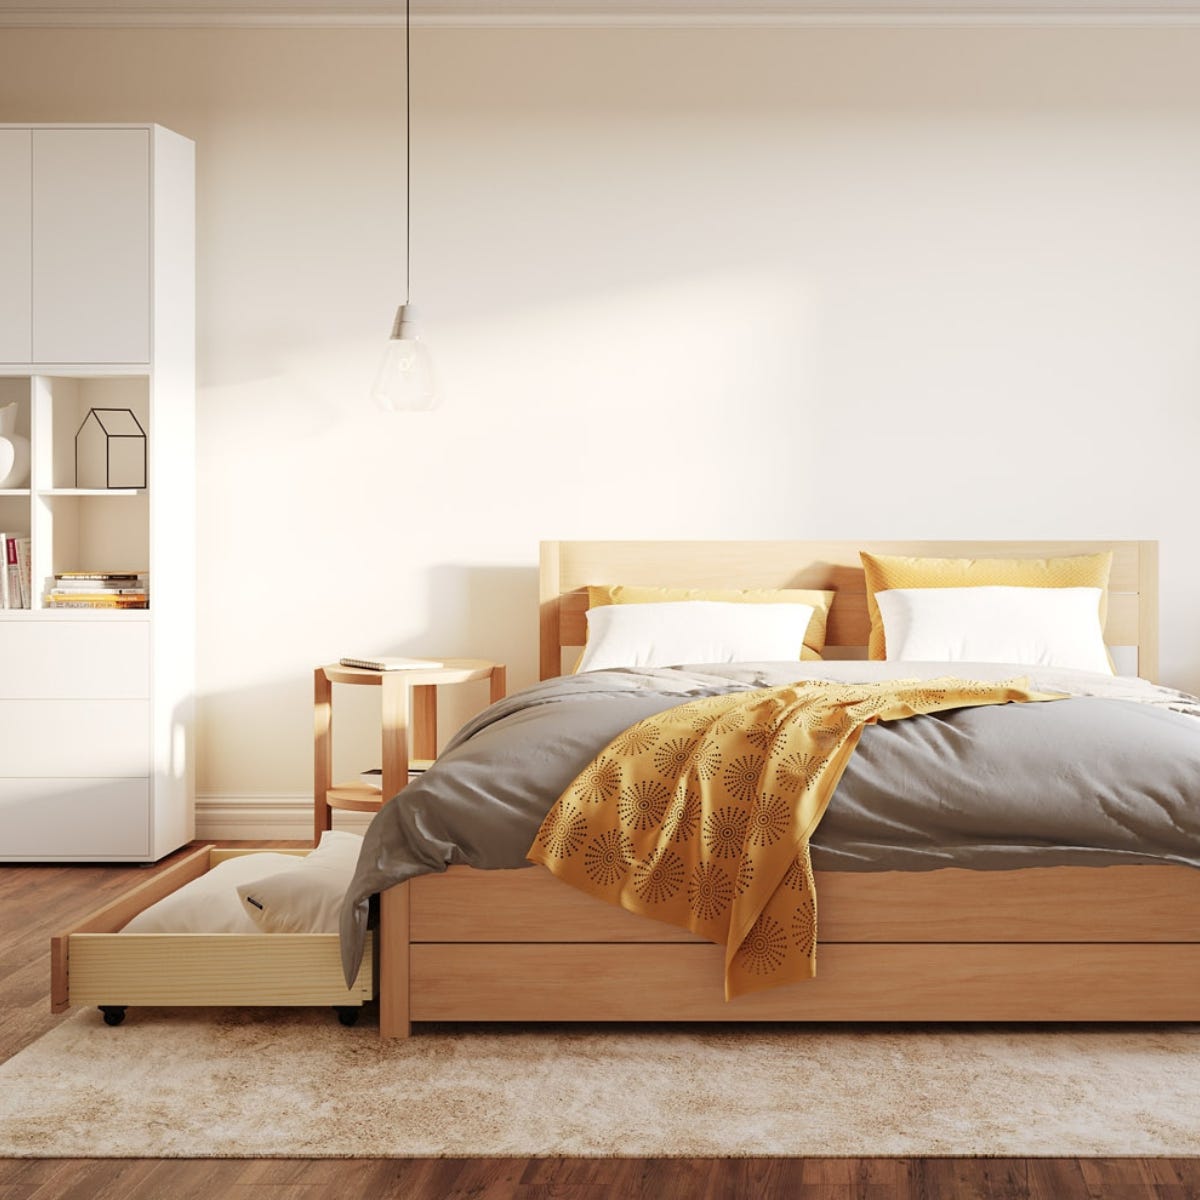 Classic_Wooden_Bed_Influencer_Mood_4